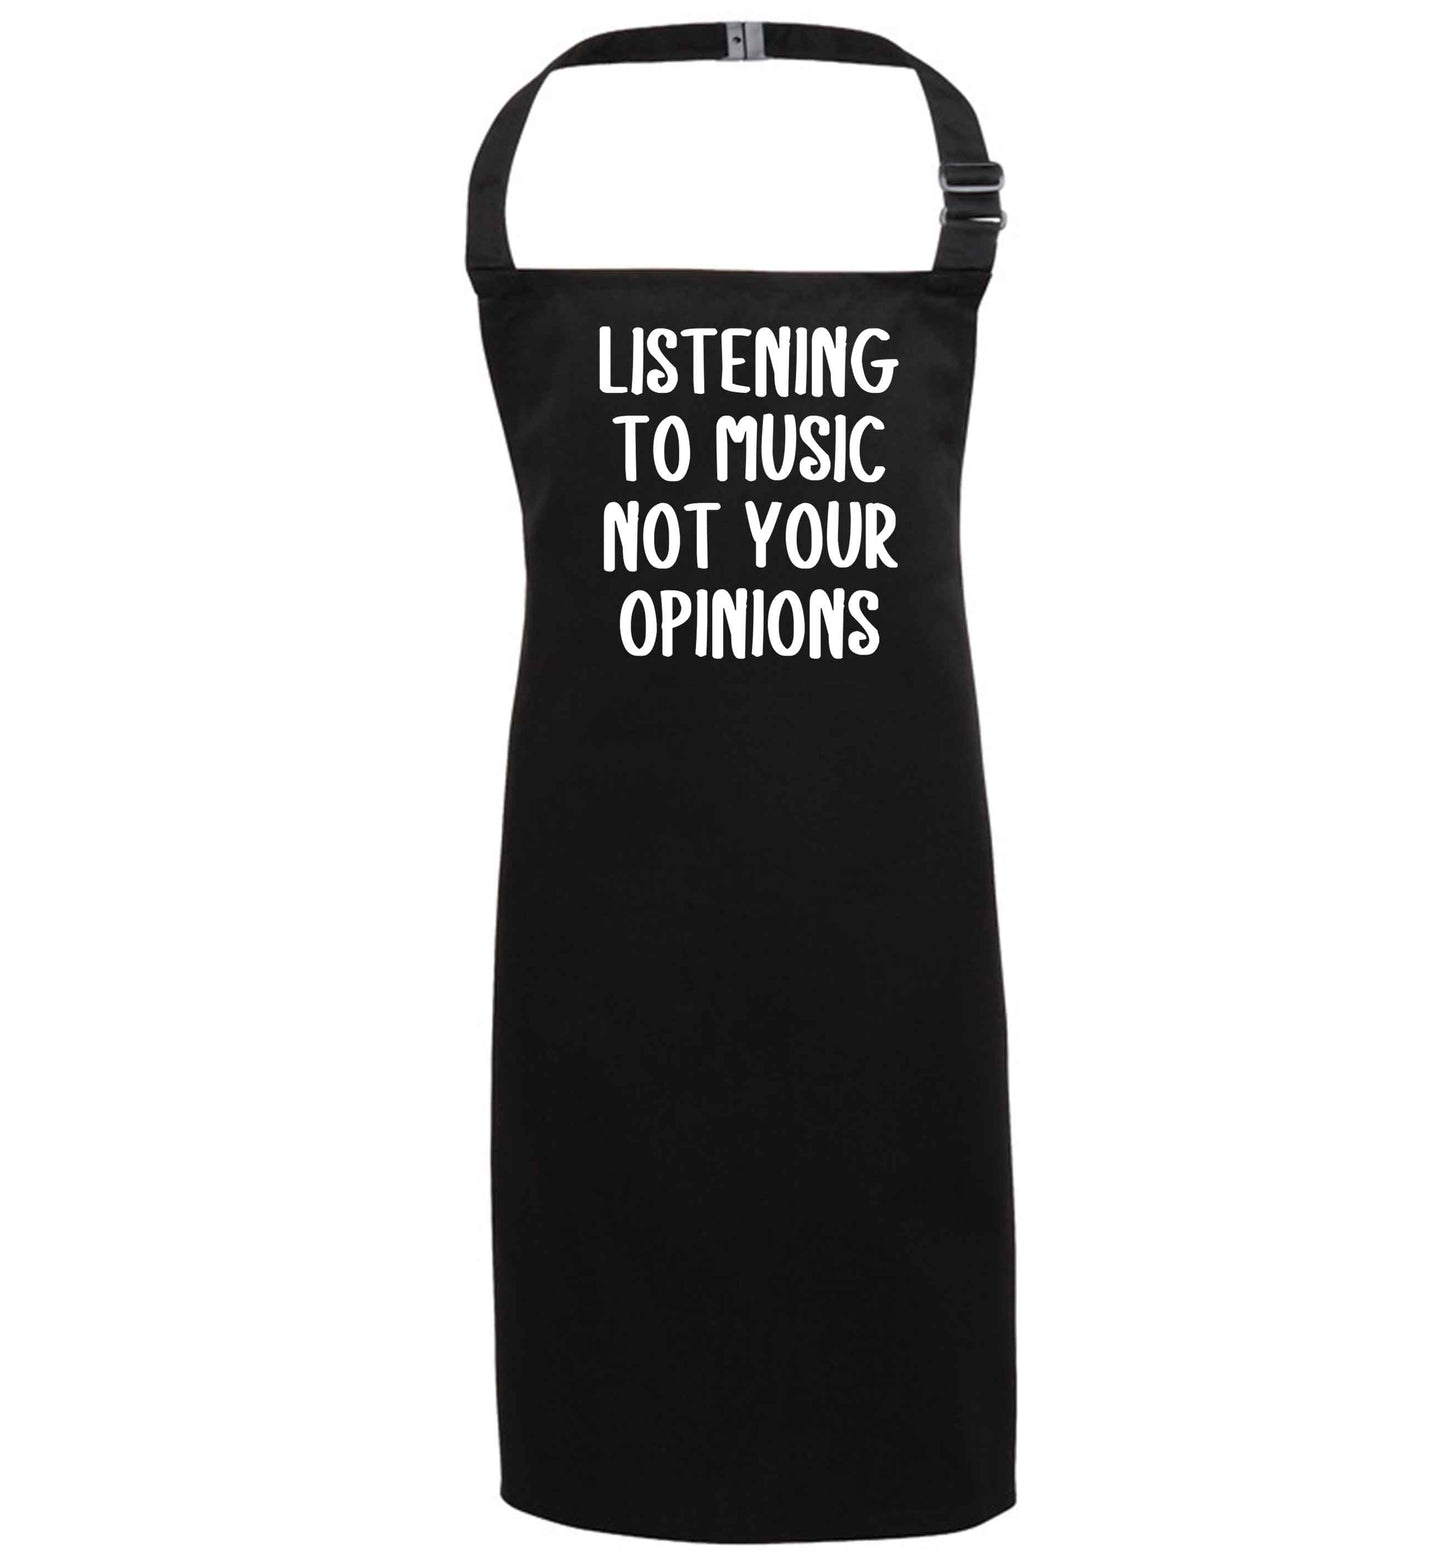 Listening to music not your opinions black apron 7-10 years